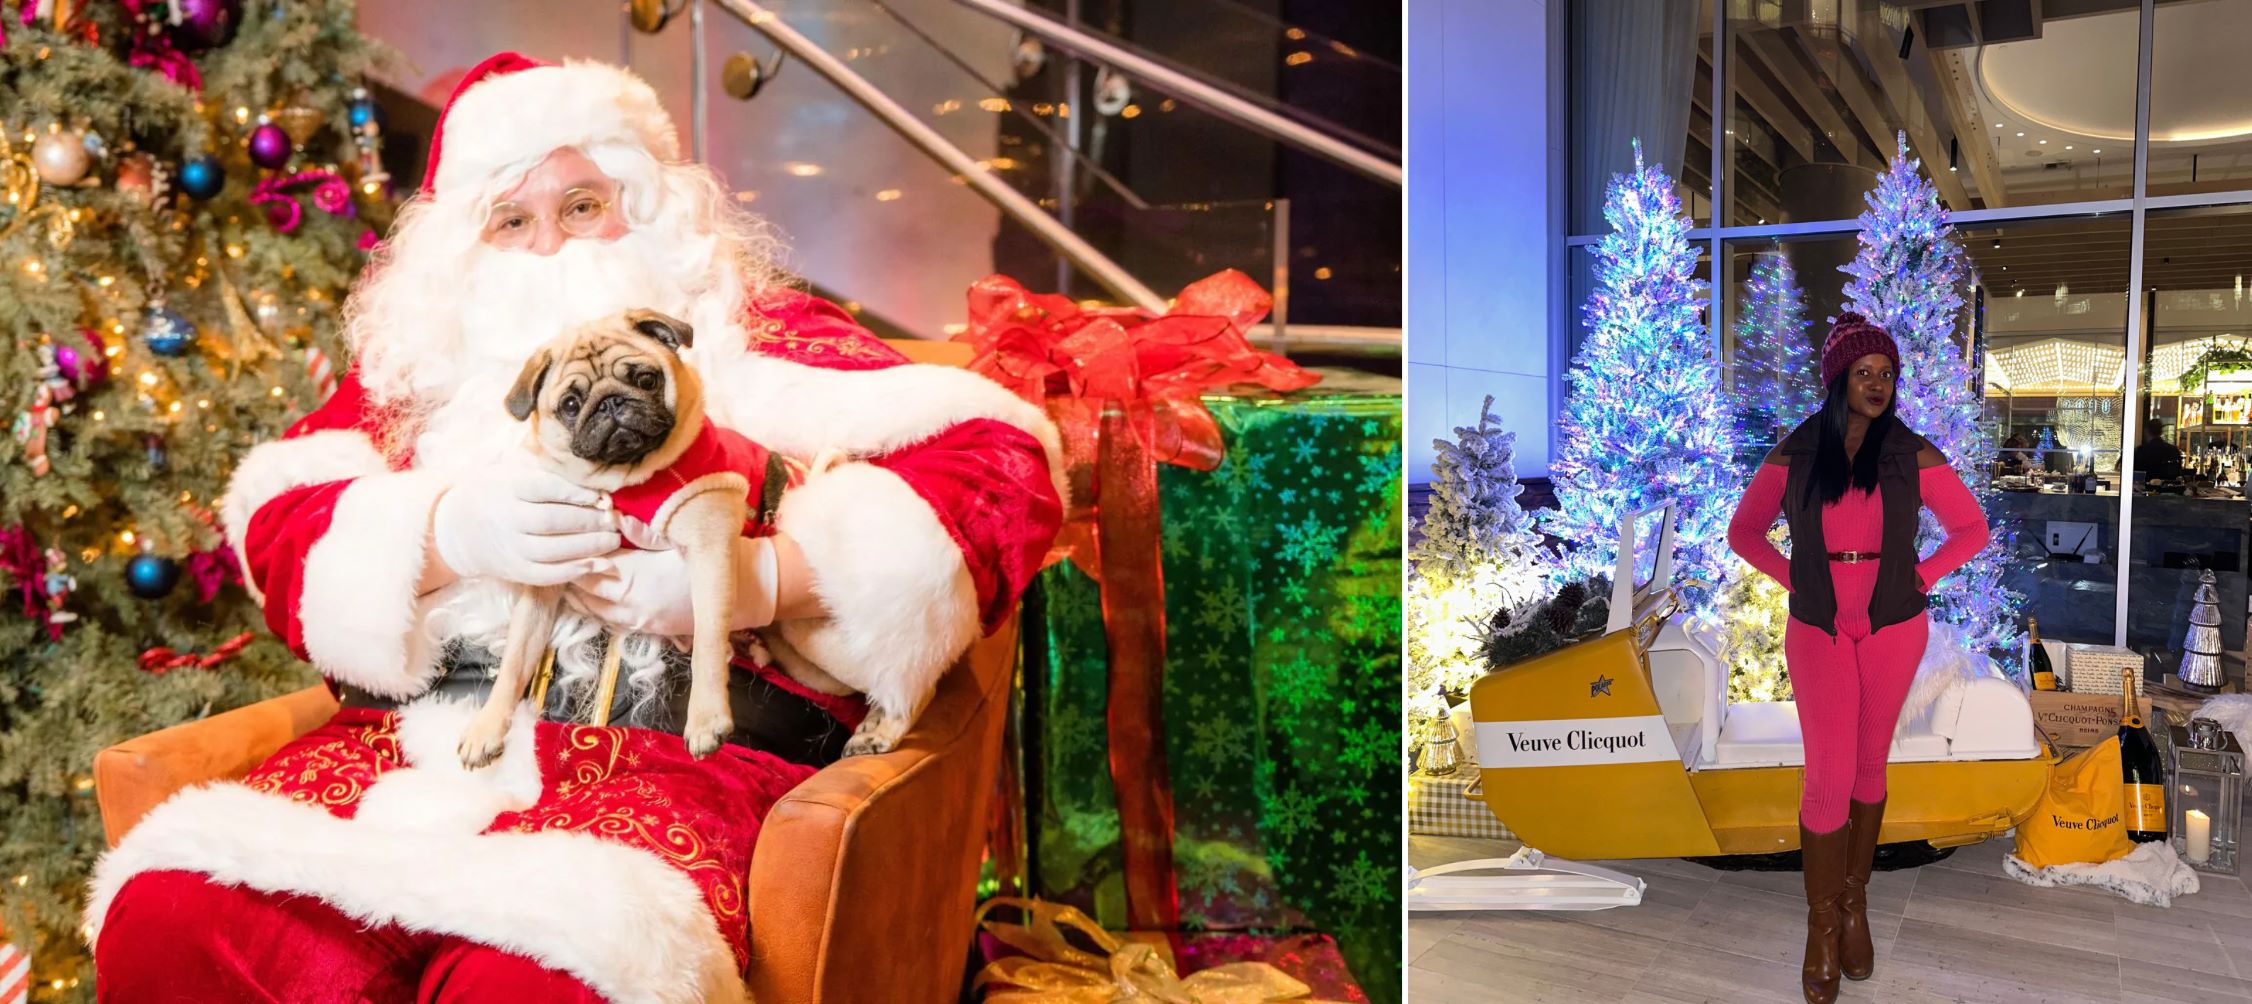 The Best Christmas and Holiday Activities in Los Angeles (2023): Christmas Lights, Pictures with Santa, Holiday Movie Screenings, and More!